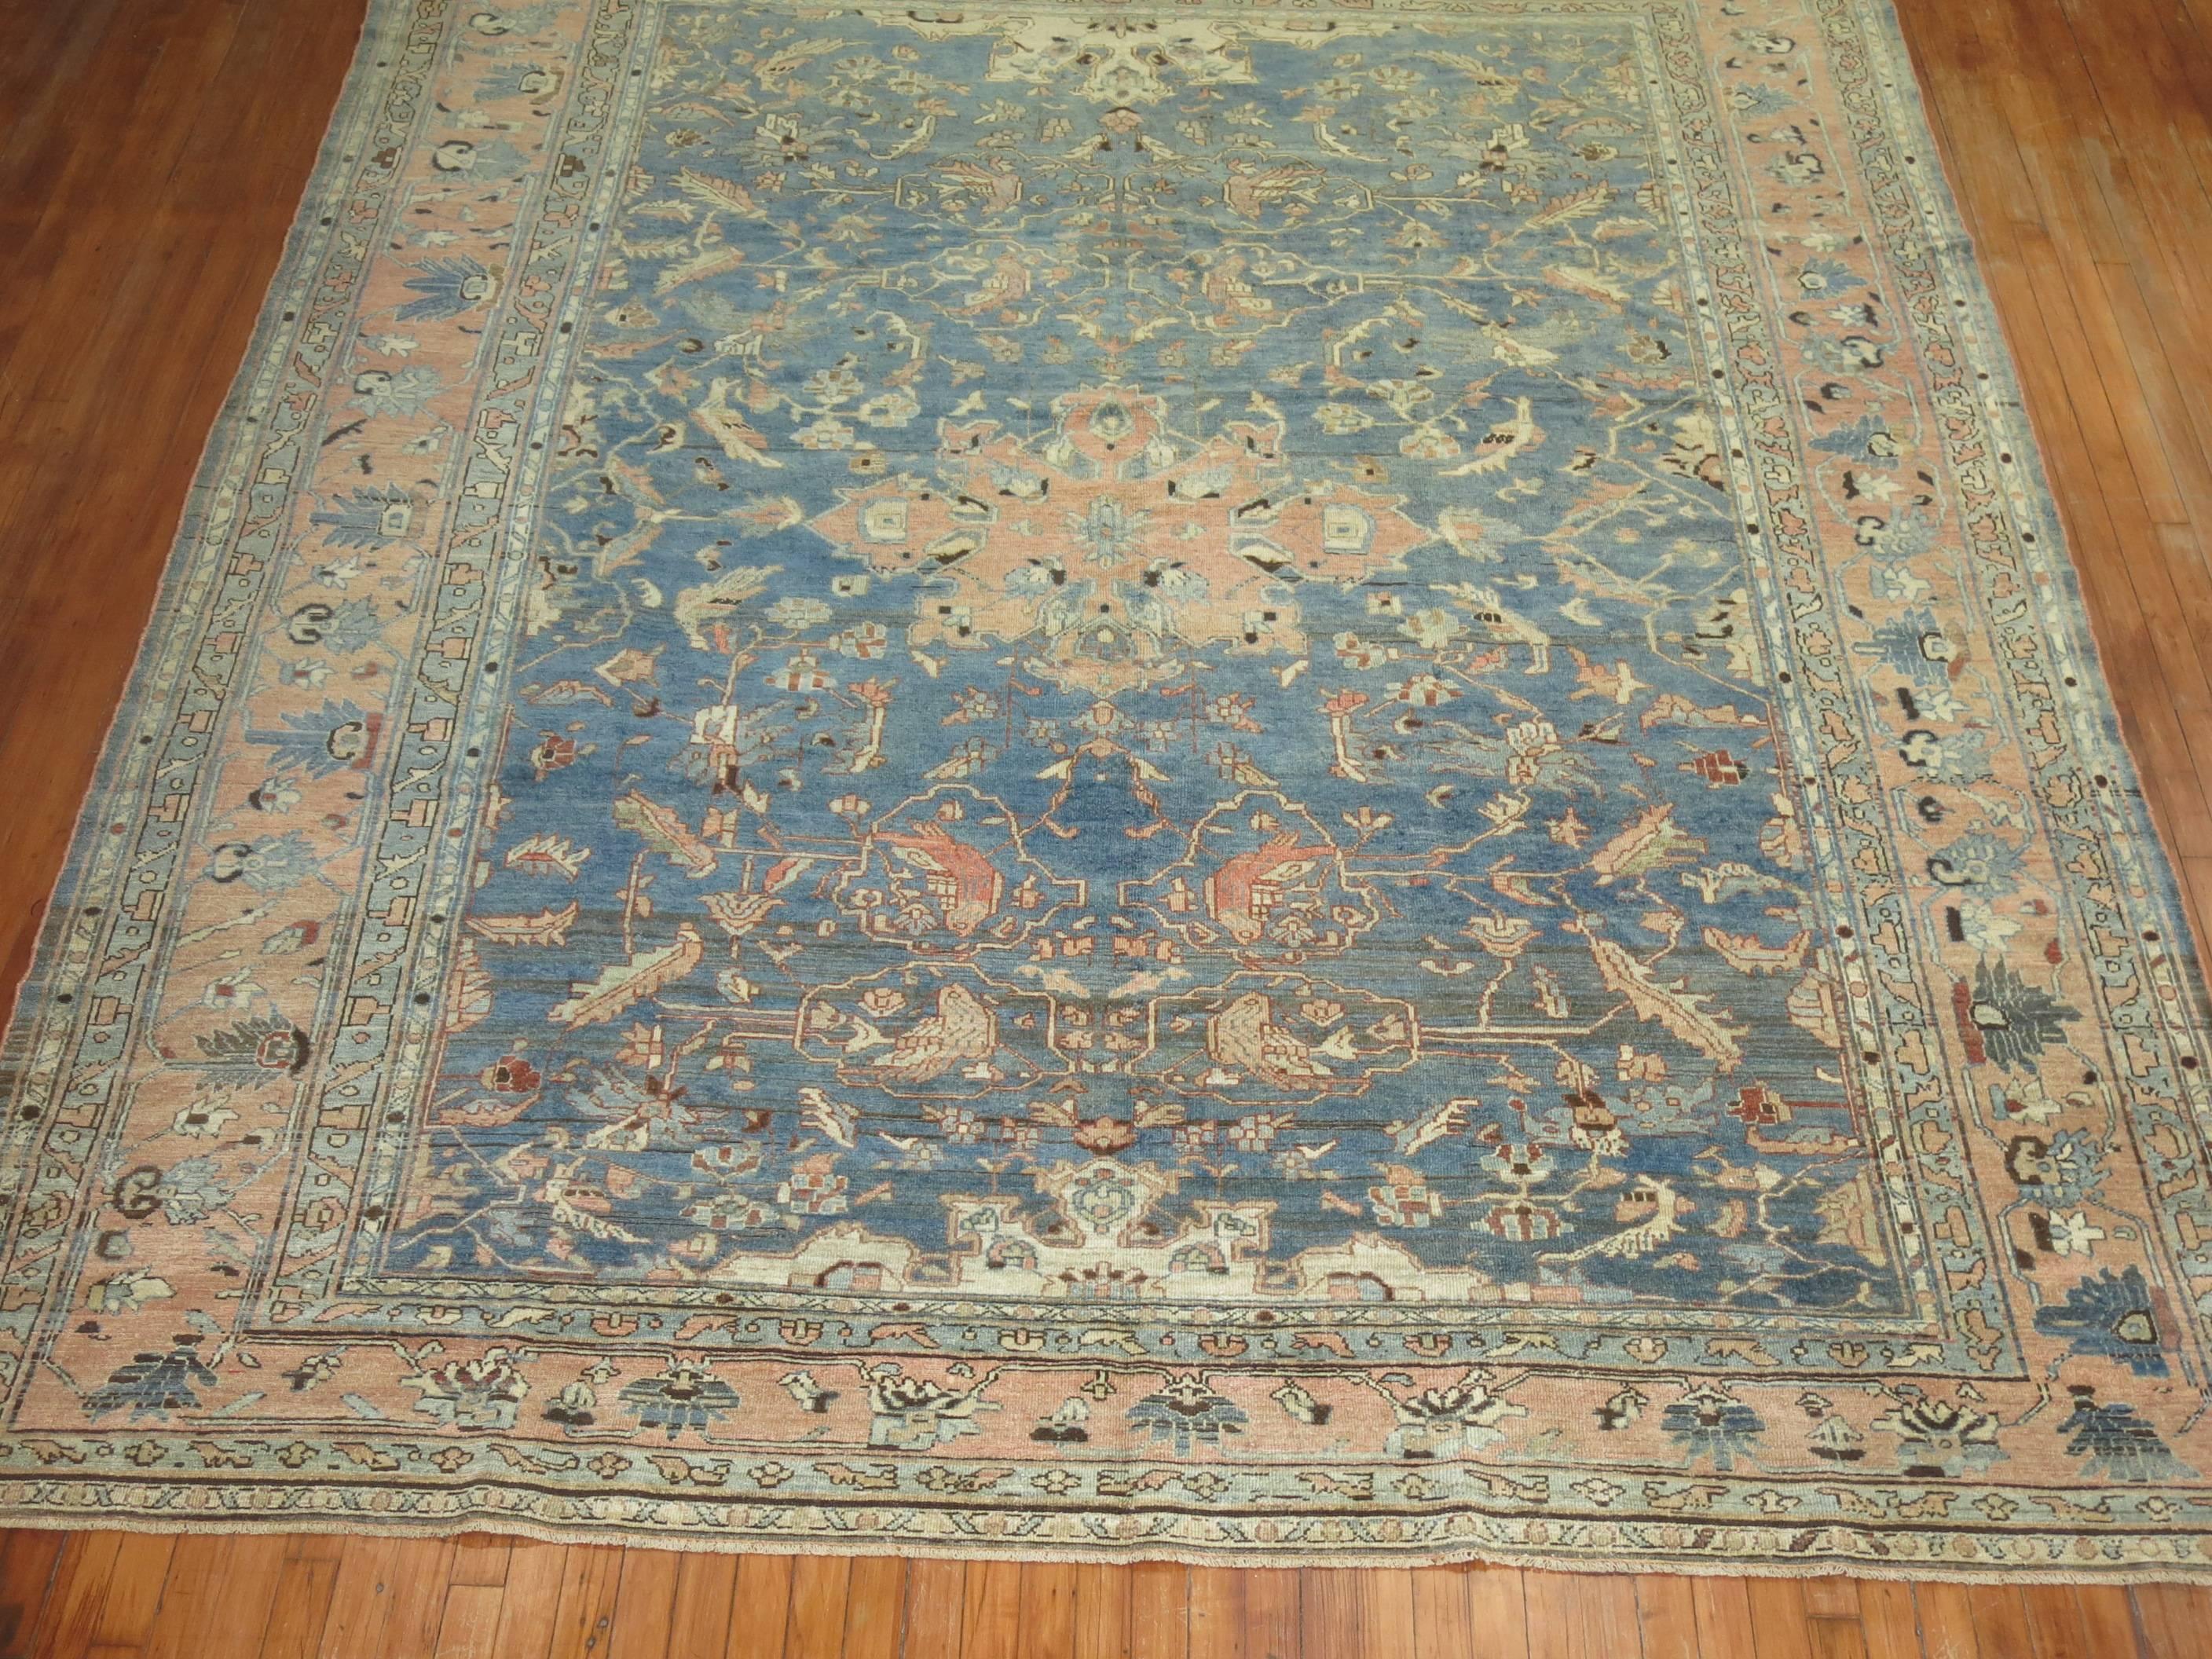 An early 20th century Persian Malayer rug. Abrashed blue field and terracotta border. A few pigeons are spotted in the field, circa 1920.

Measures: 8'11'' x 11'3''.